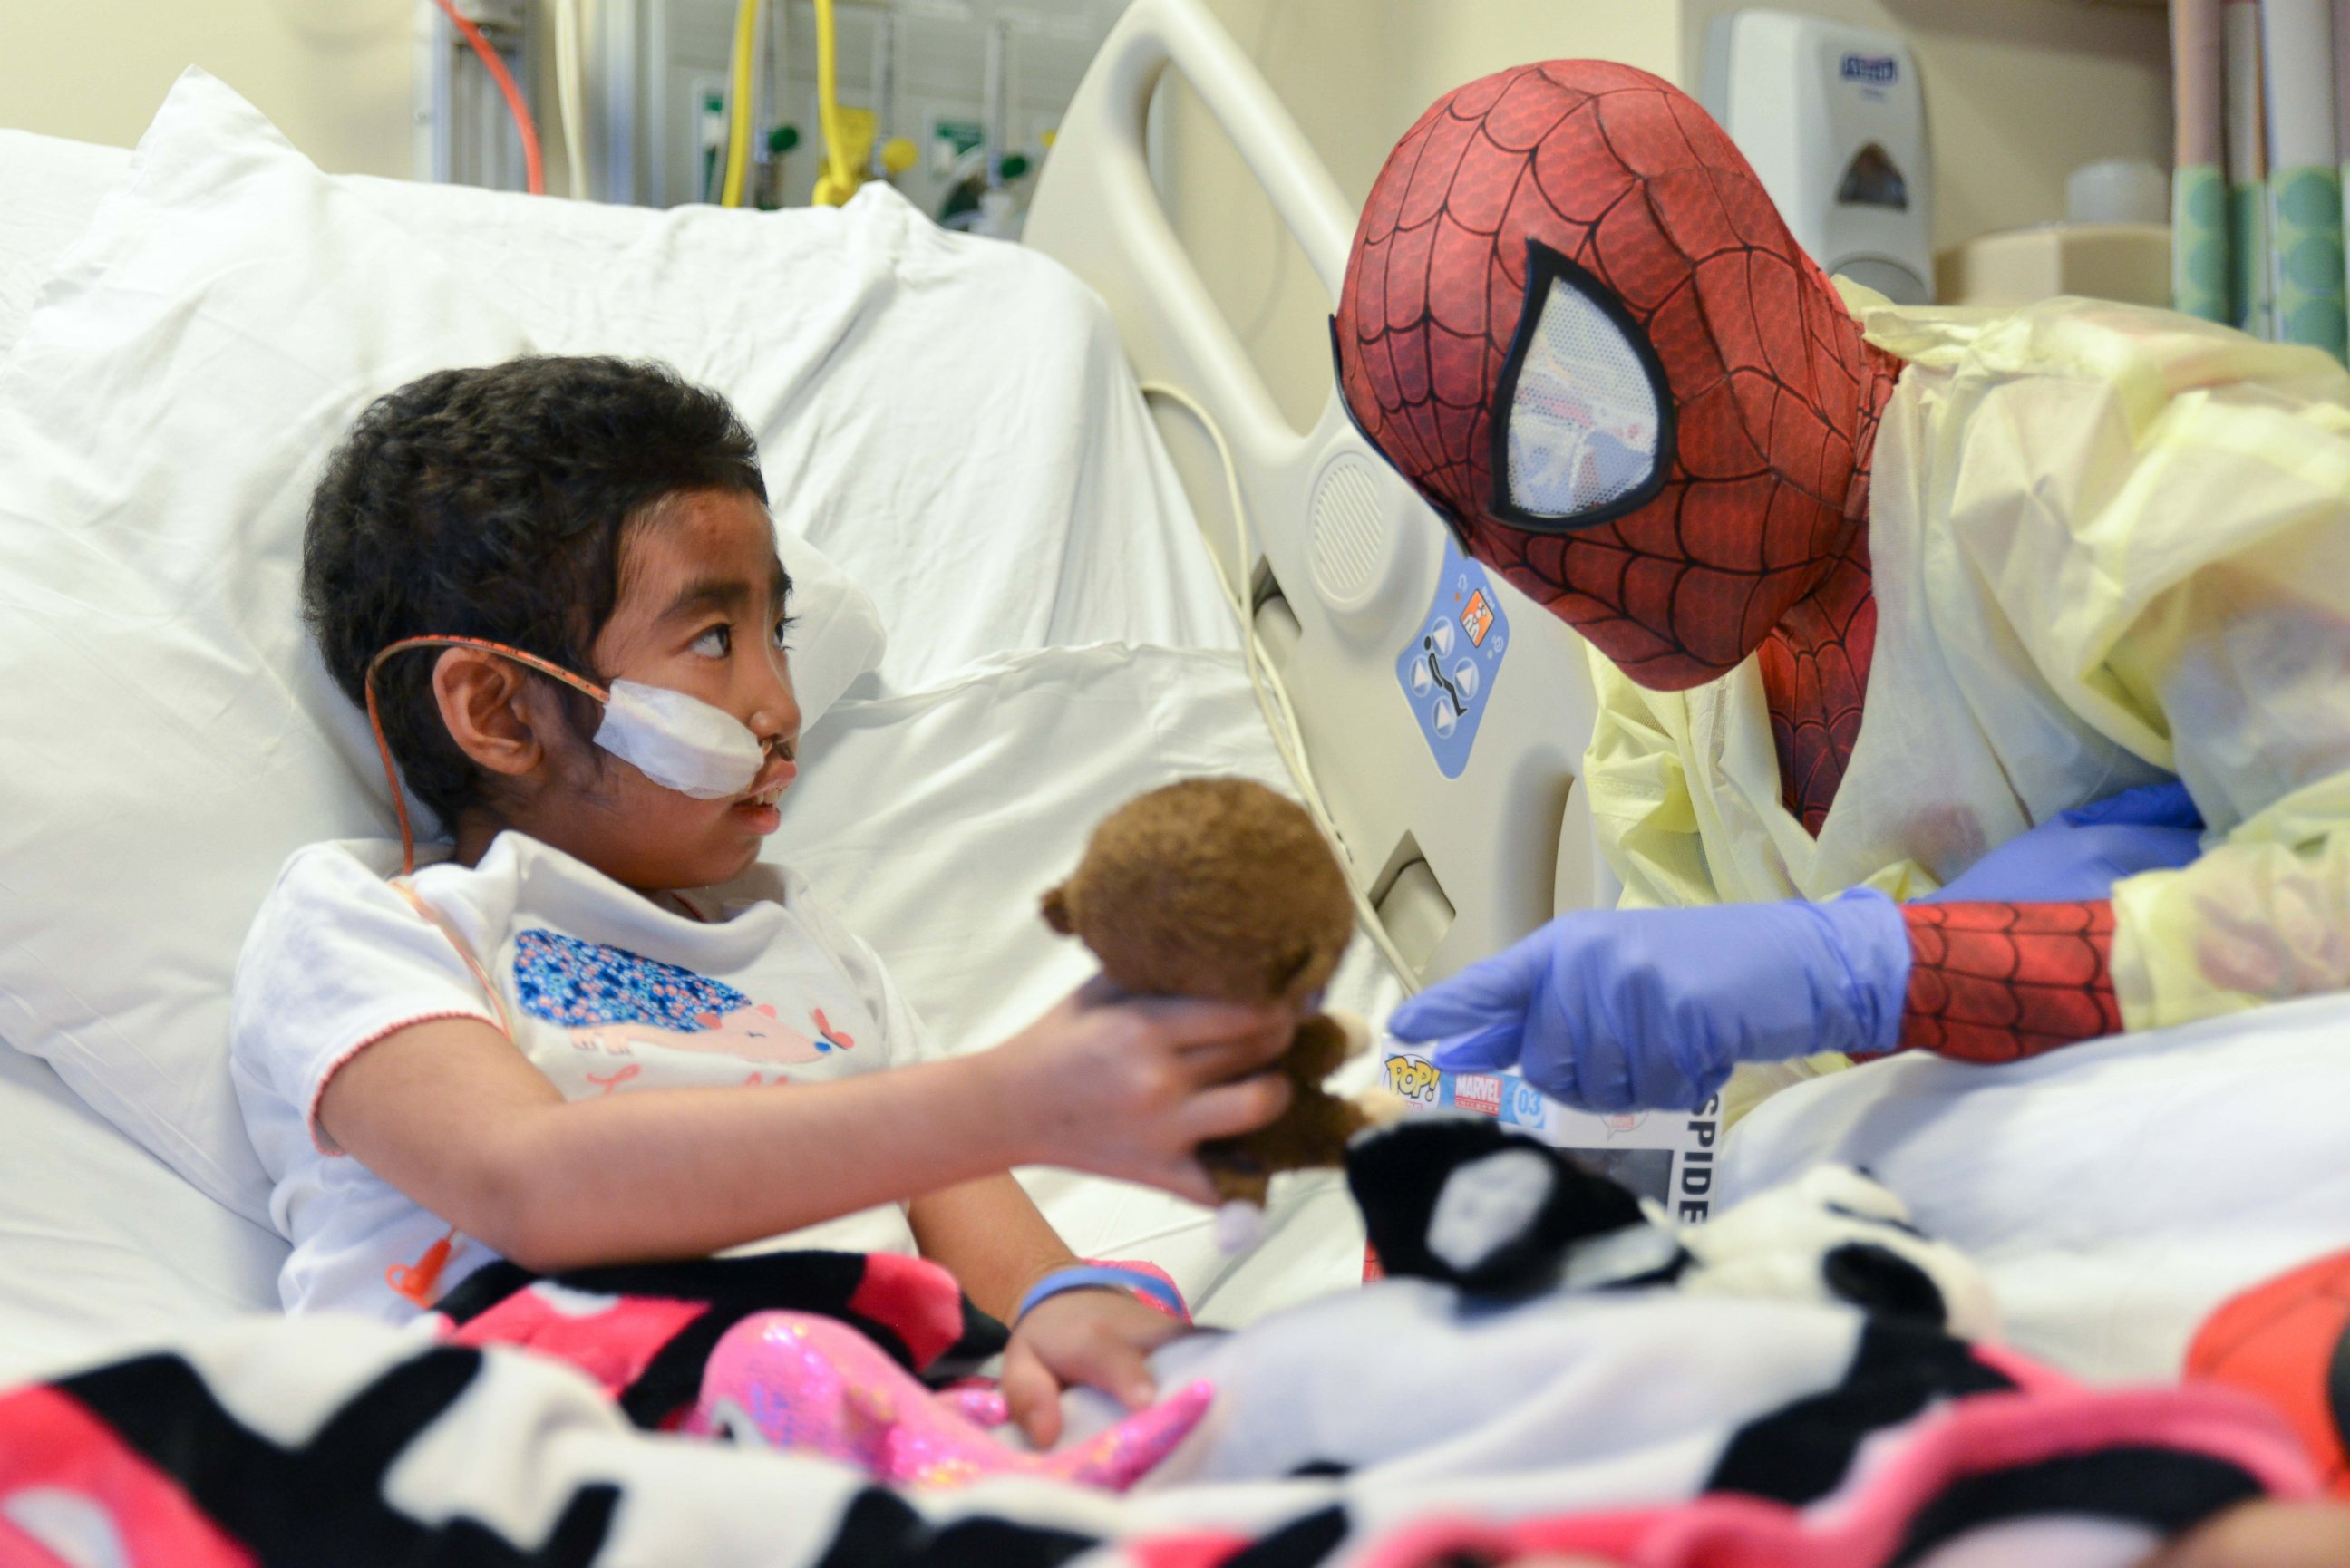 PHOTO: Christina, 8, shows Spiderman her favorite stuffed monkey, Coconut and later her stuffed panda, Bamboo.